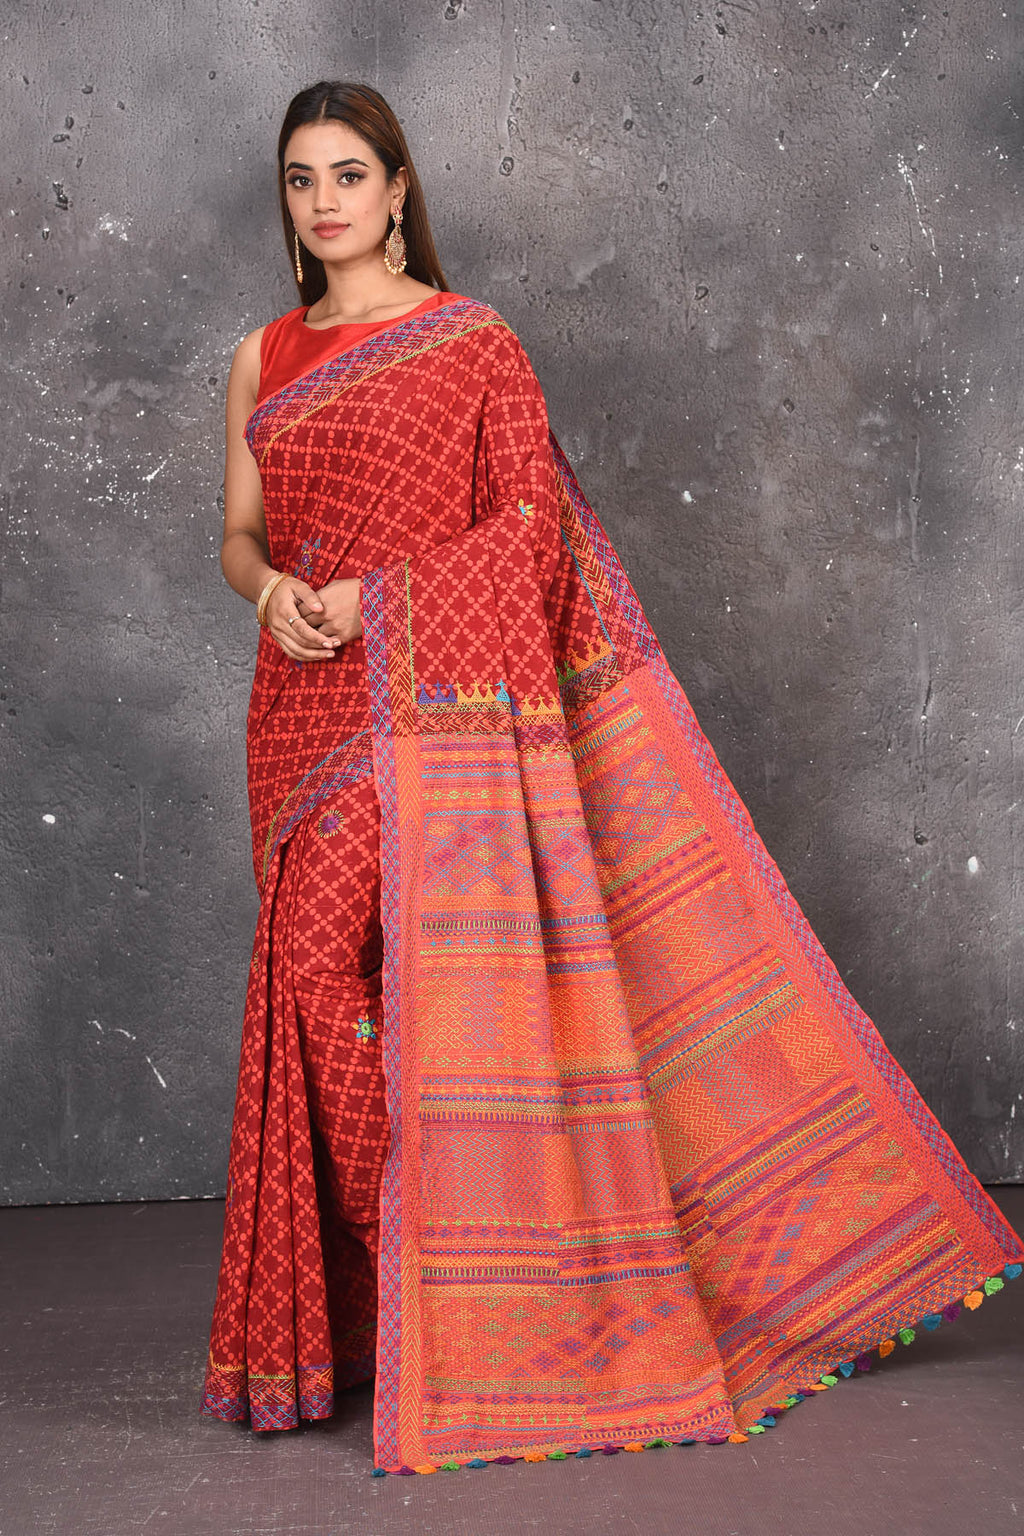 Shop this classy red hand painted madhubani cotton saree online in USA. Perfect to be worn as part of your everyday work wear, with this hand-painted red Madhubani saree, elegance meets traditional. Add this designer Lambani embroidery designer saree with colored tassels to your collection from Pure Elegance Indian Fashion Store in USA.- Full view.